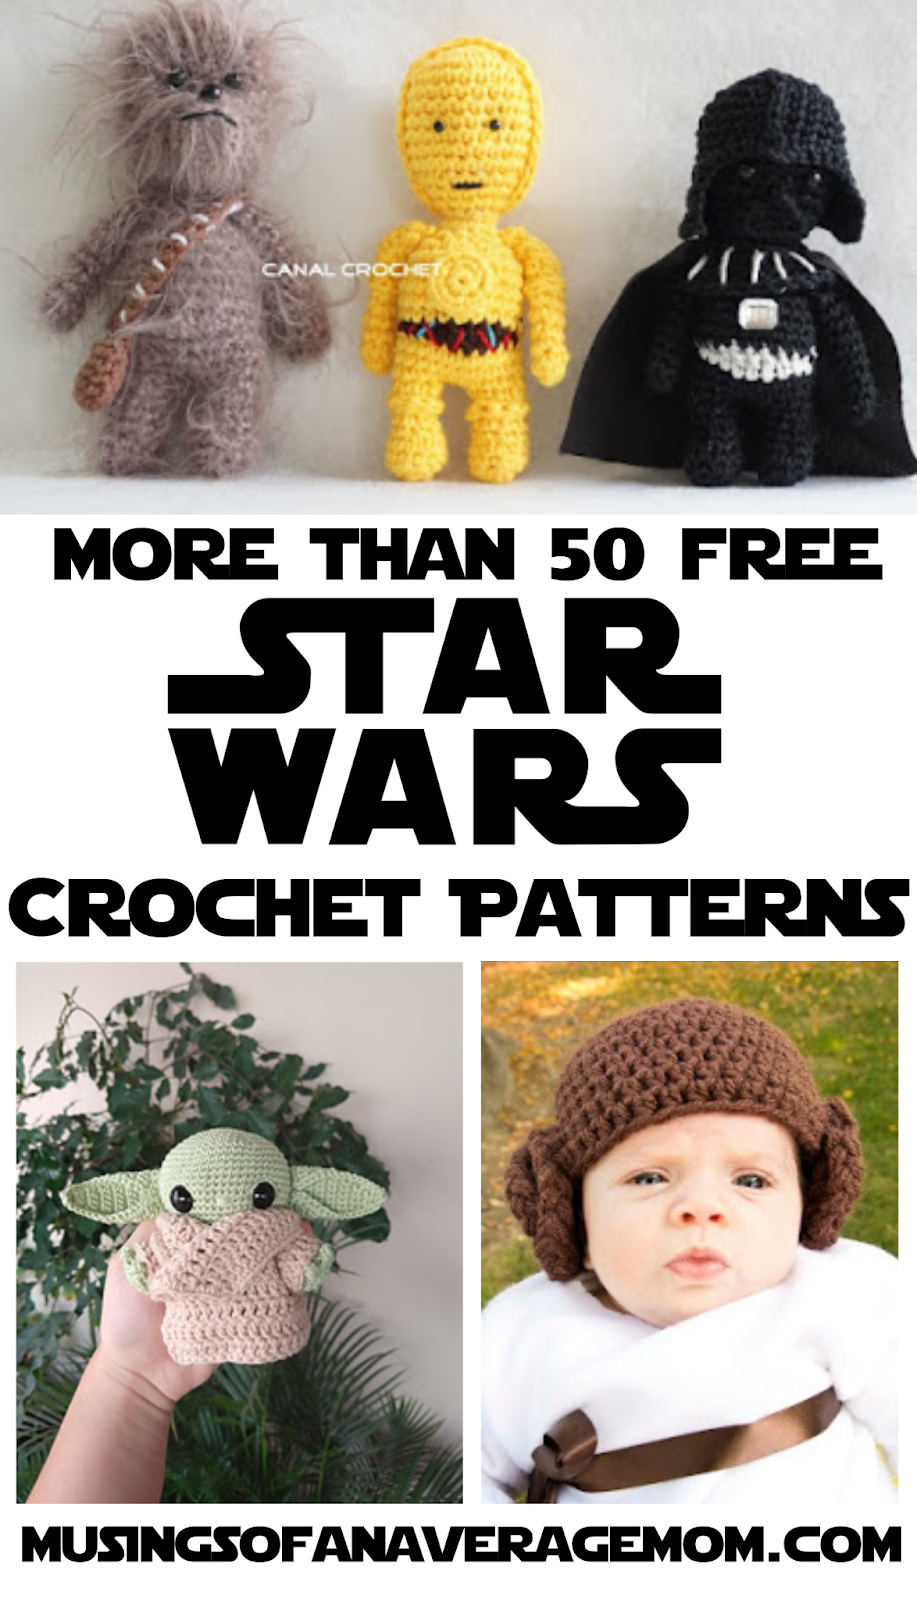 Musings of an Average Mom: Free character crochet patterns